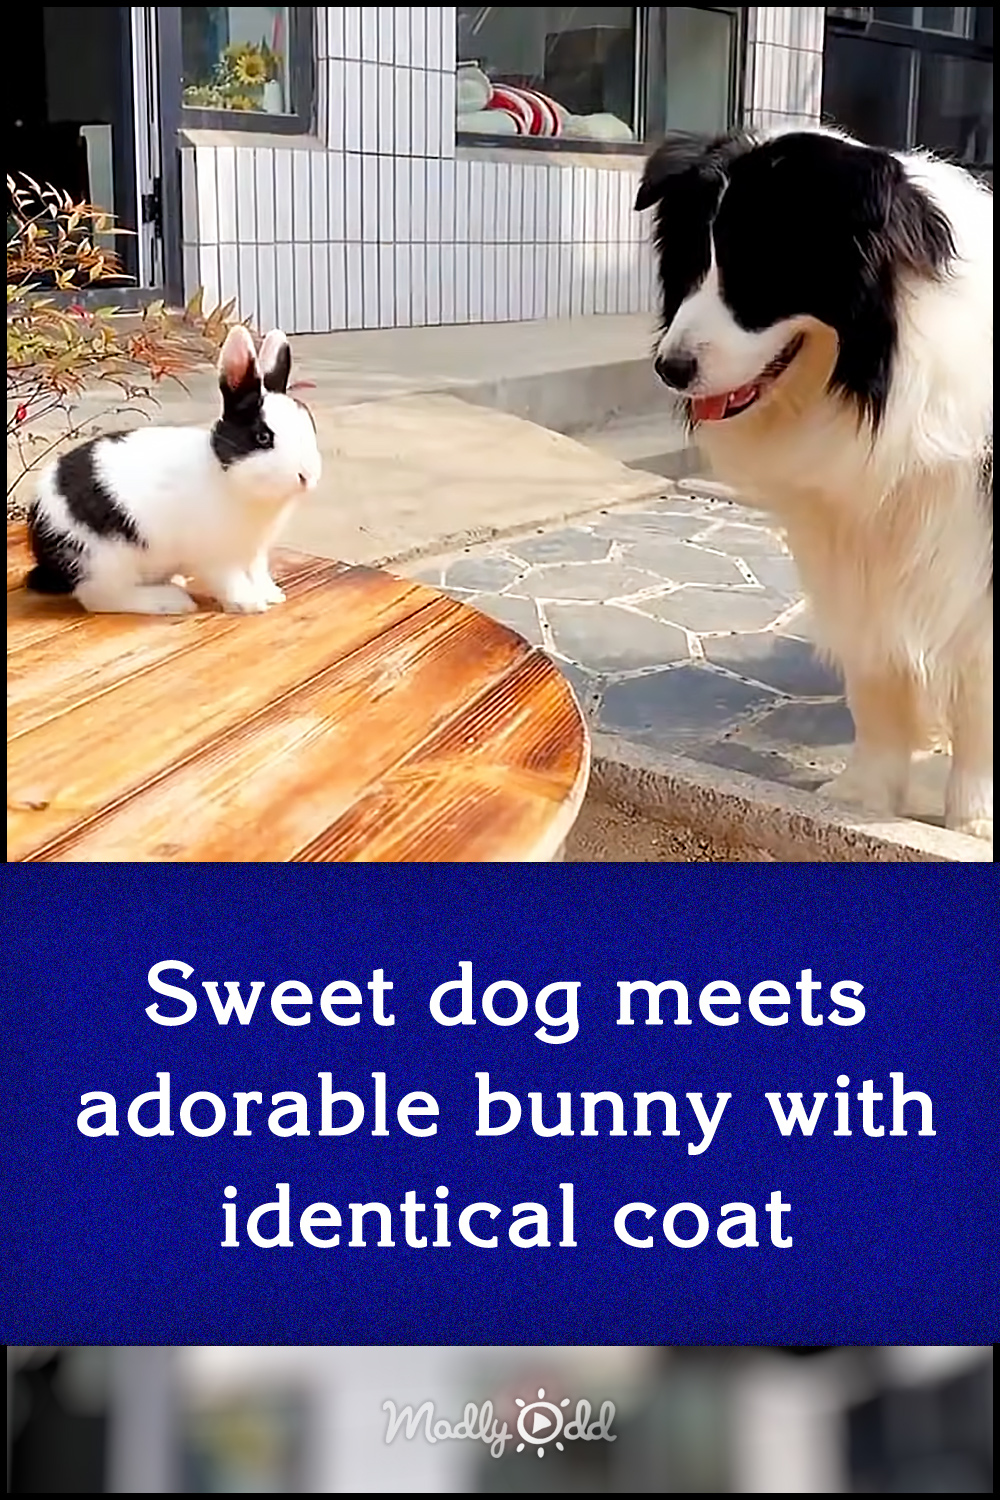 Sweet dog meets adorable bunny with identical coat